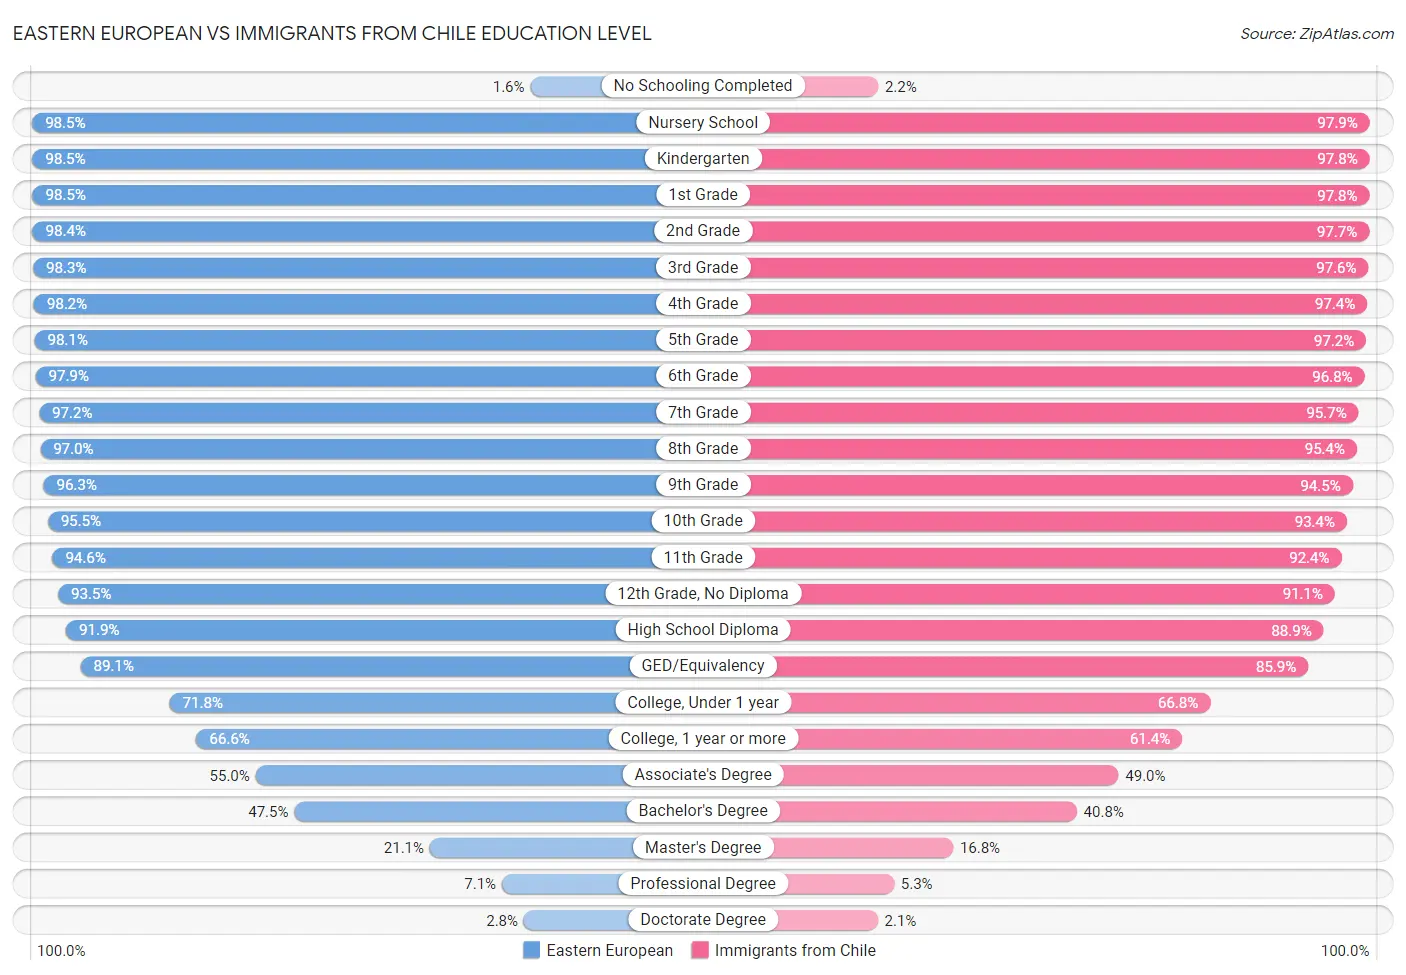 Eastern European vs Immigrants from Chile Education Level